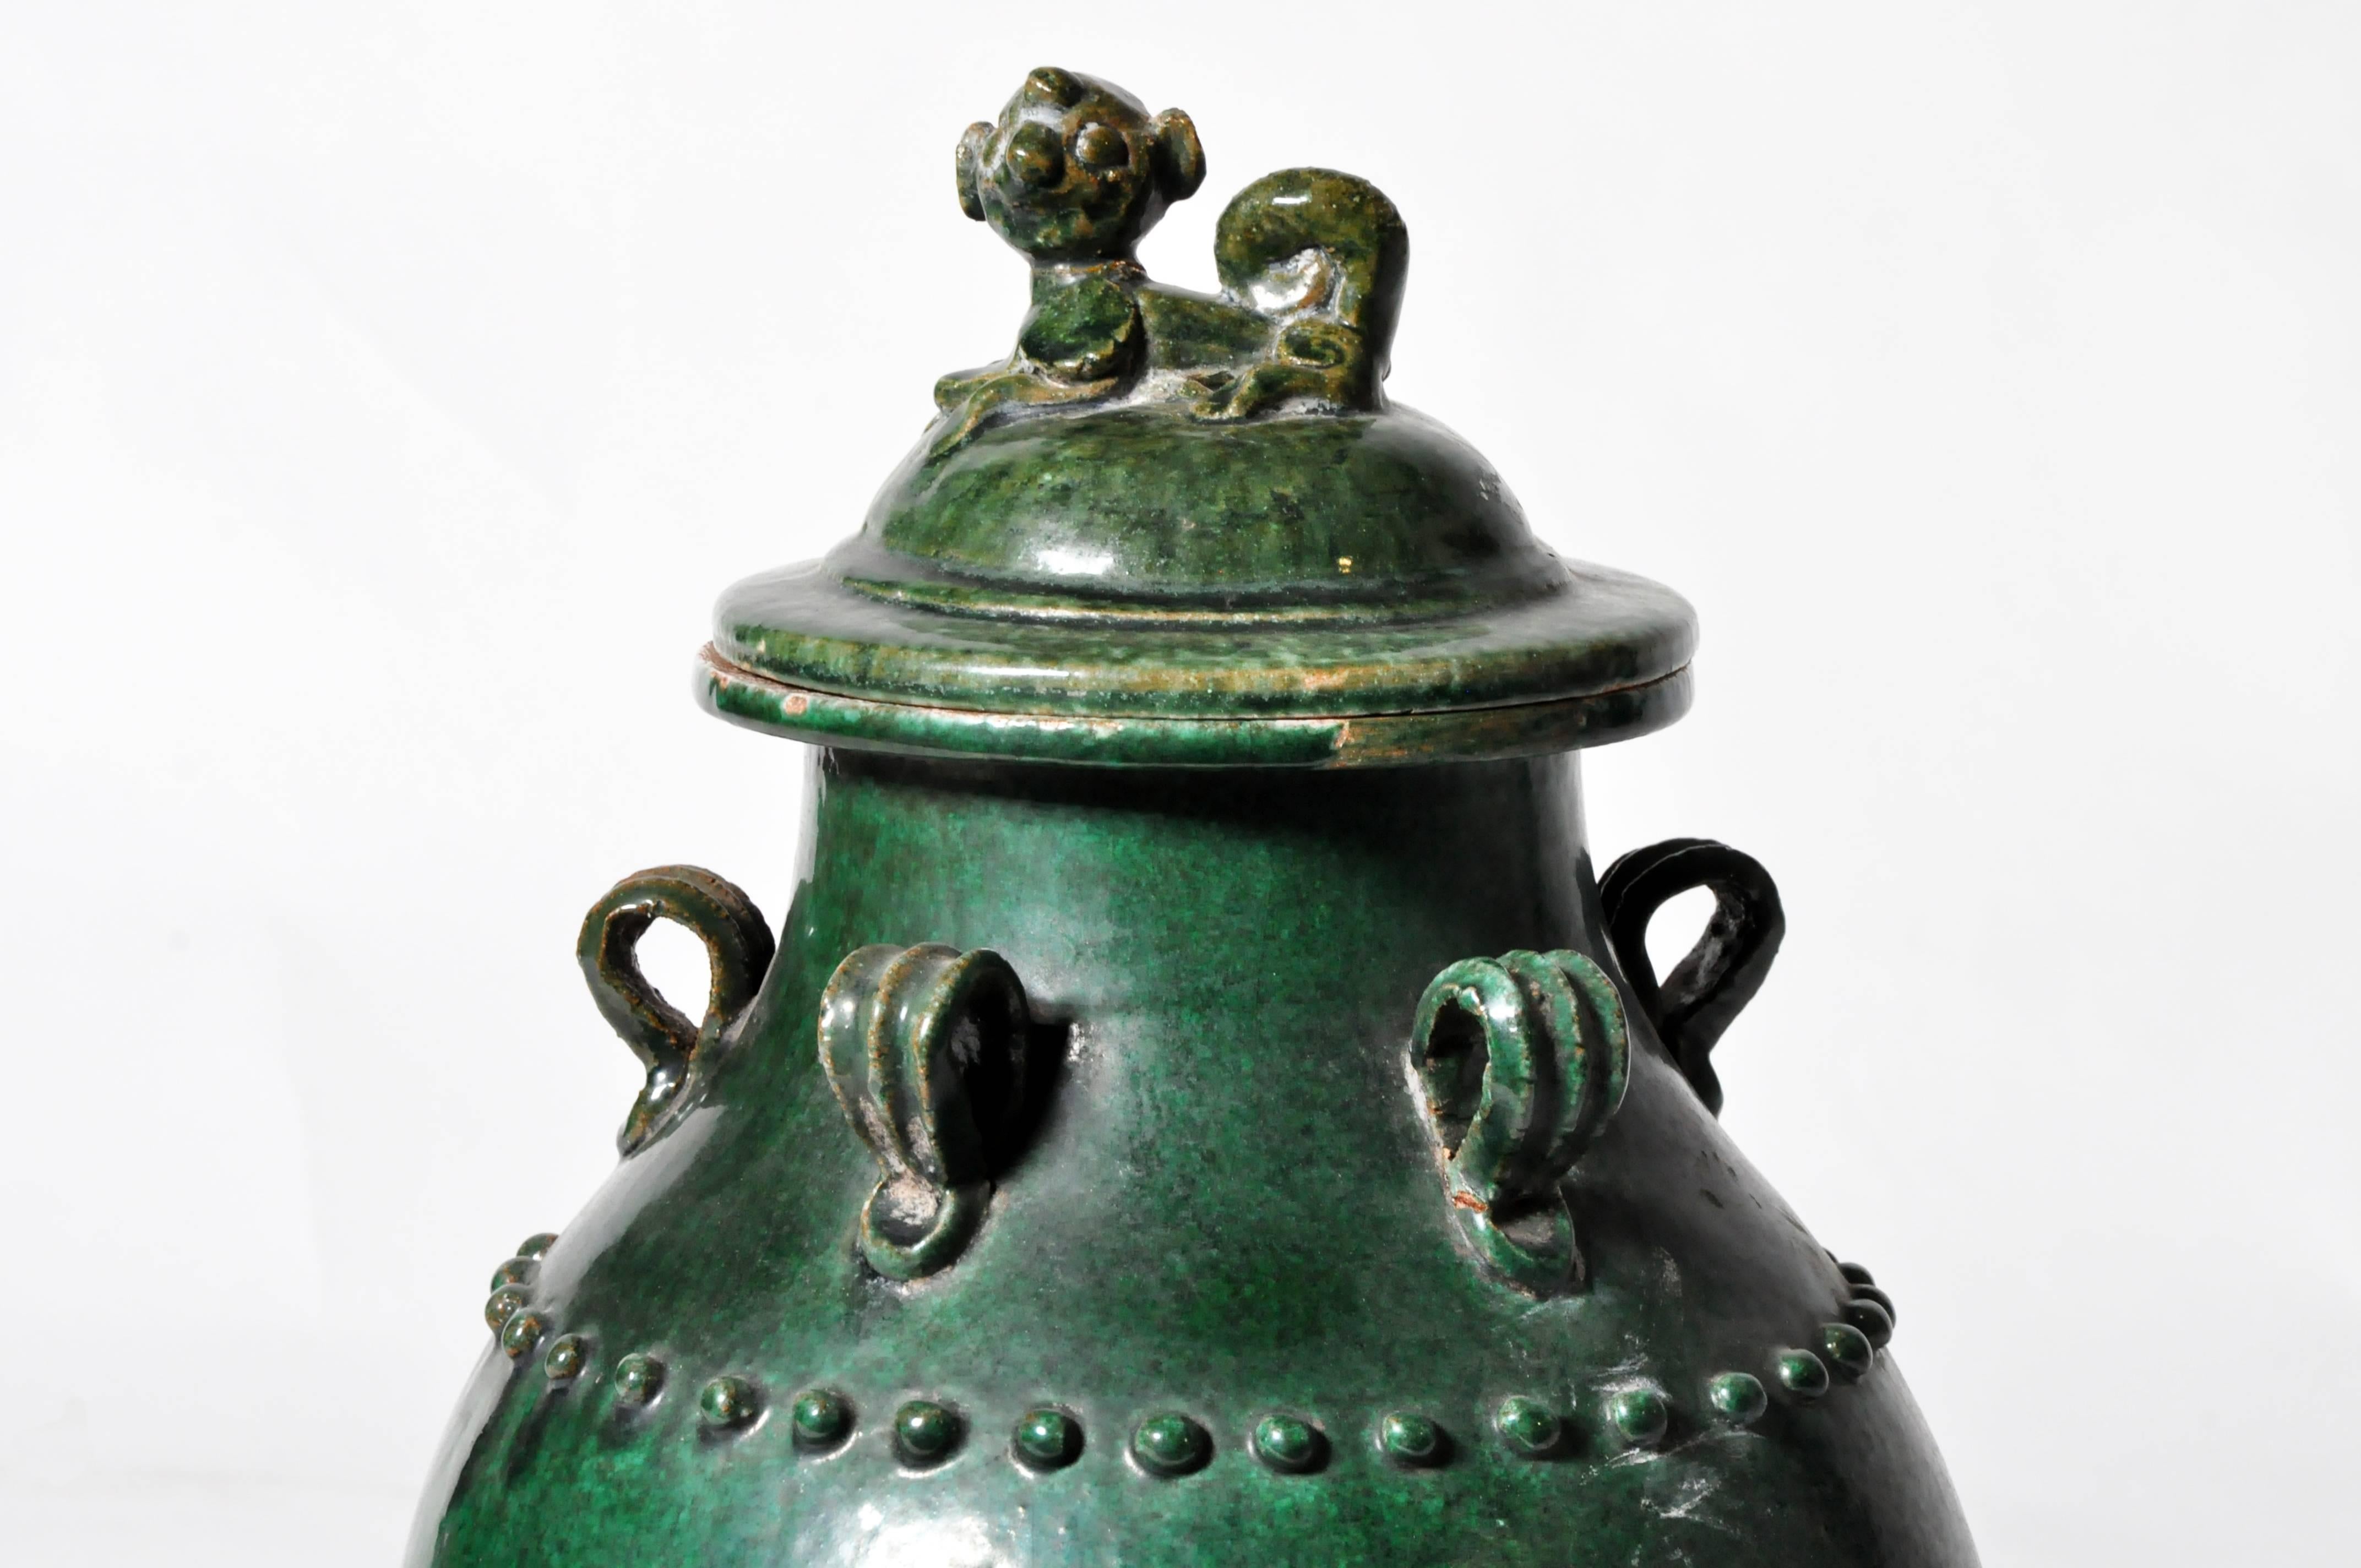 This earthenware pot has five handle rings, a lid topped with a miniature 'Fu' Dog, and a glistening patina. Its rich green hue comes from a traditional glaze of lead and copper, used in display pieces and funerary offerings since the late Han